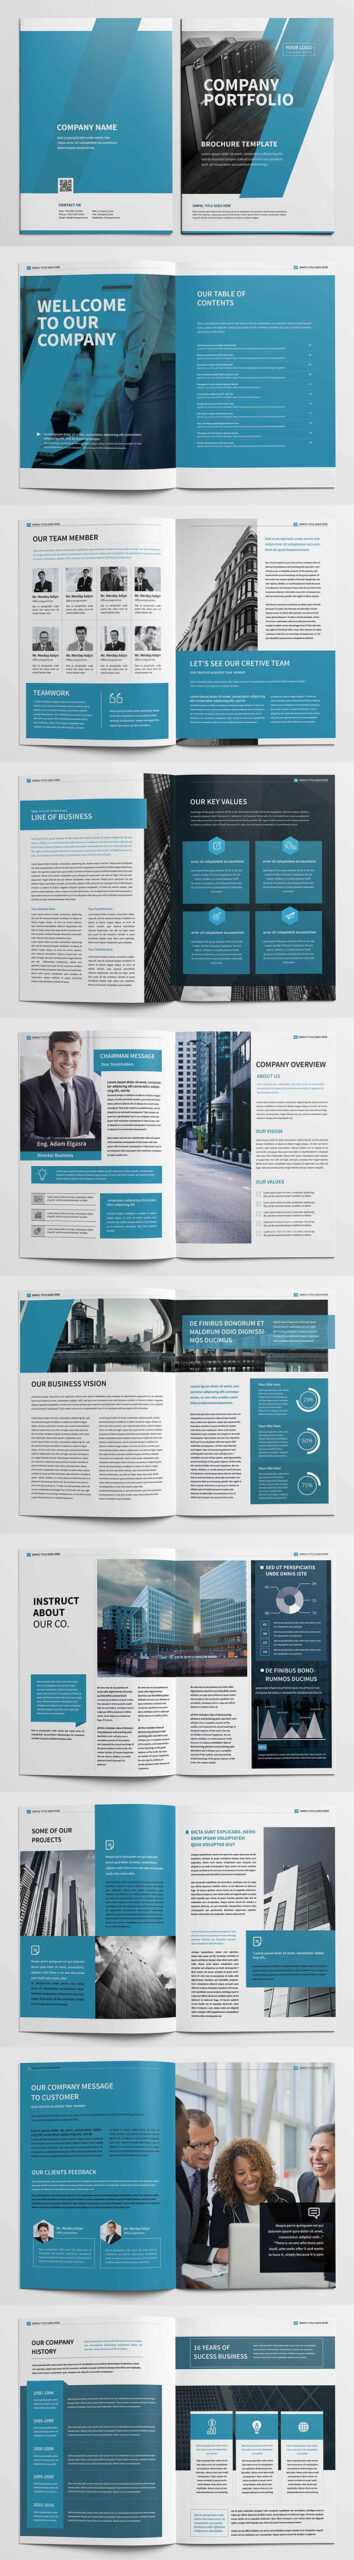 Brochure Templates And Catalog Design | Design | Graphic Within Engineering Brochure Templates